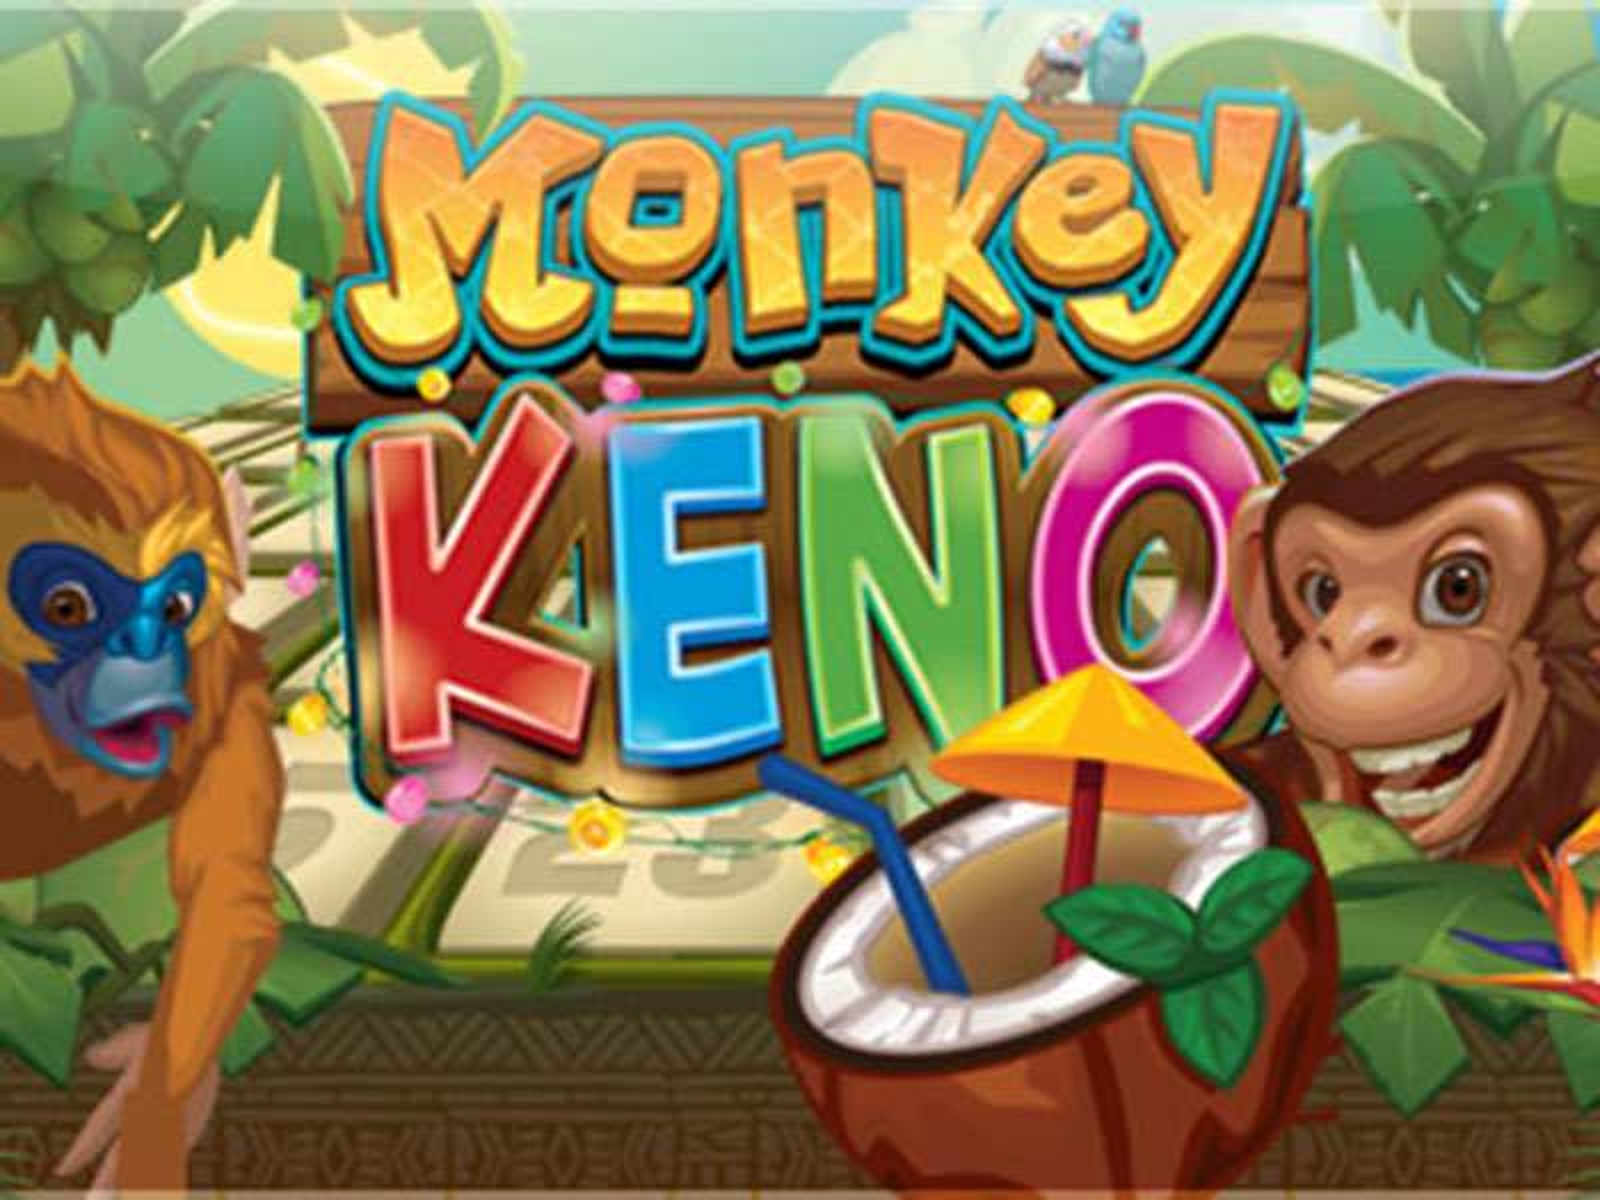 The Monkey Keno Online Slot Demo Game by Microgaming